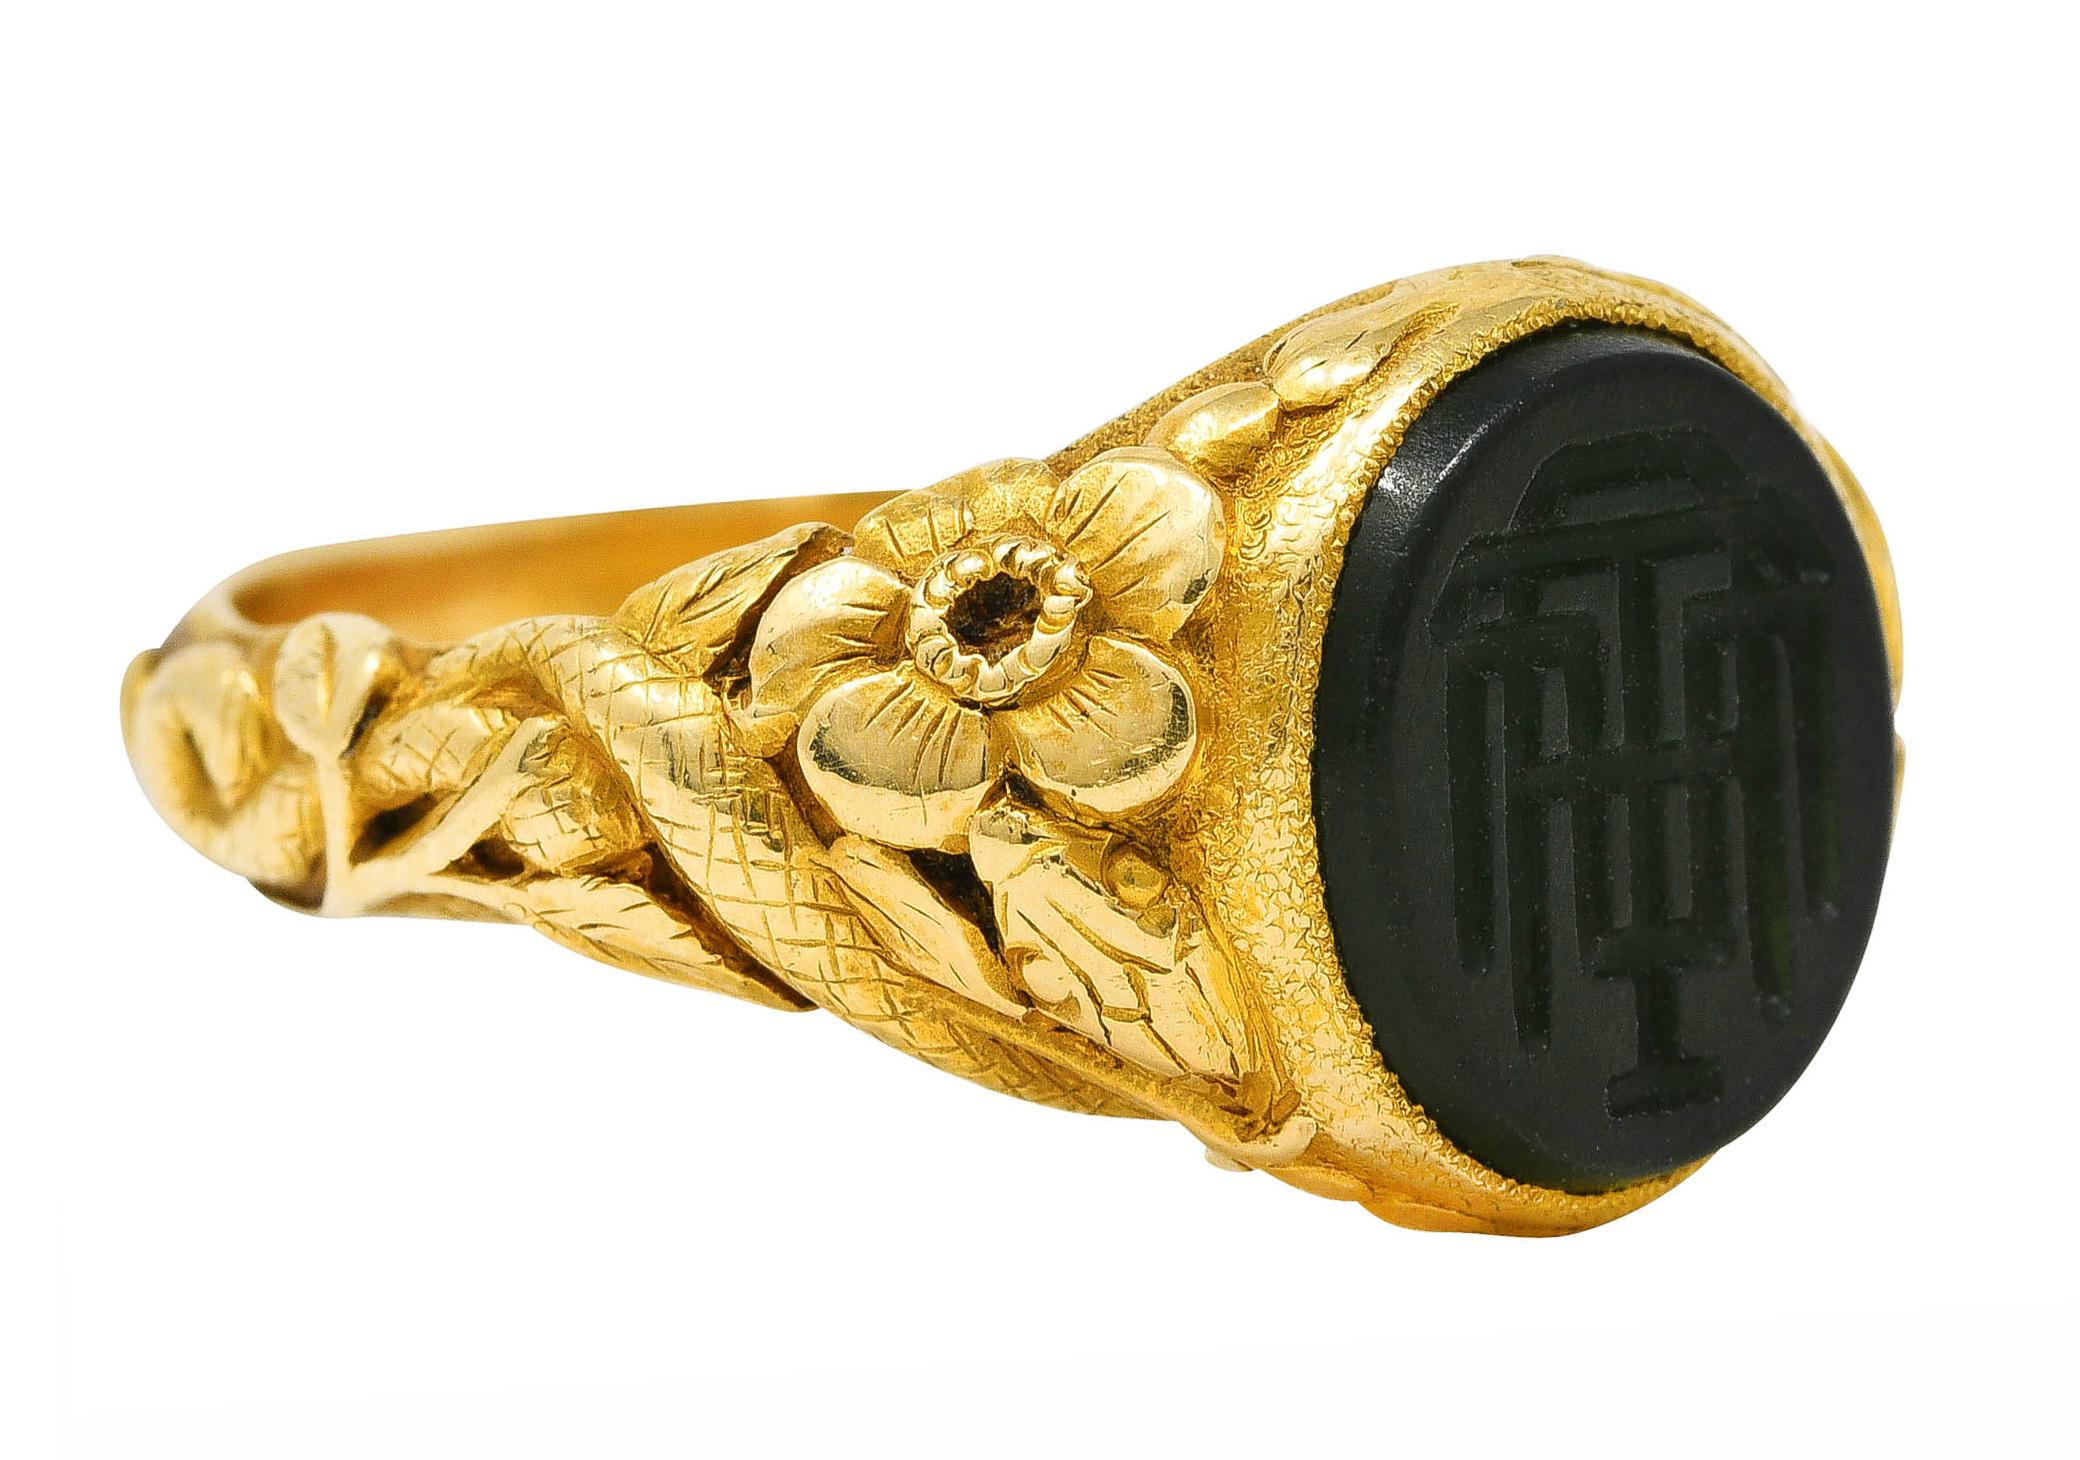 Ring centers a 8.5 x 10.0 mm nephrite jade tablet - translucent medium dark yellowish-green

Bezel set and featuring a carved intaglio of initials

Flanked by highly rendered shoulders with floral foliate and snakes

Tested as 18 karat gold

Fully